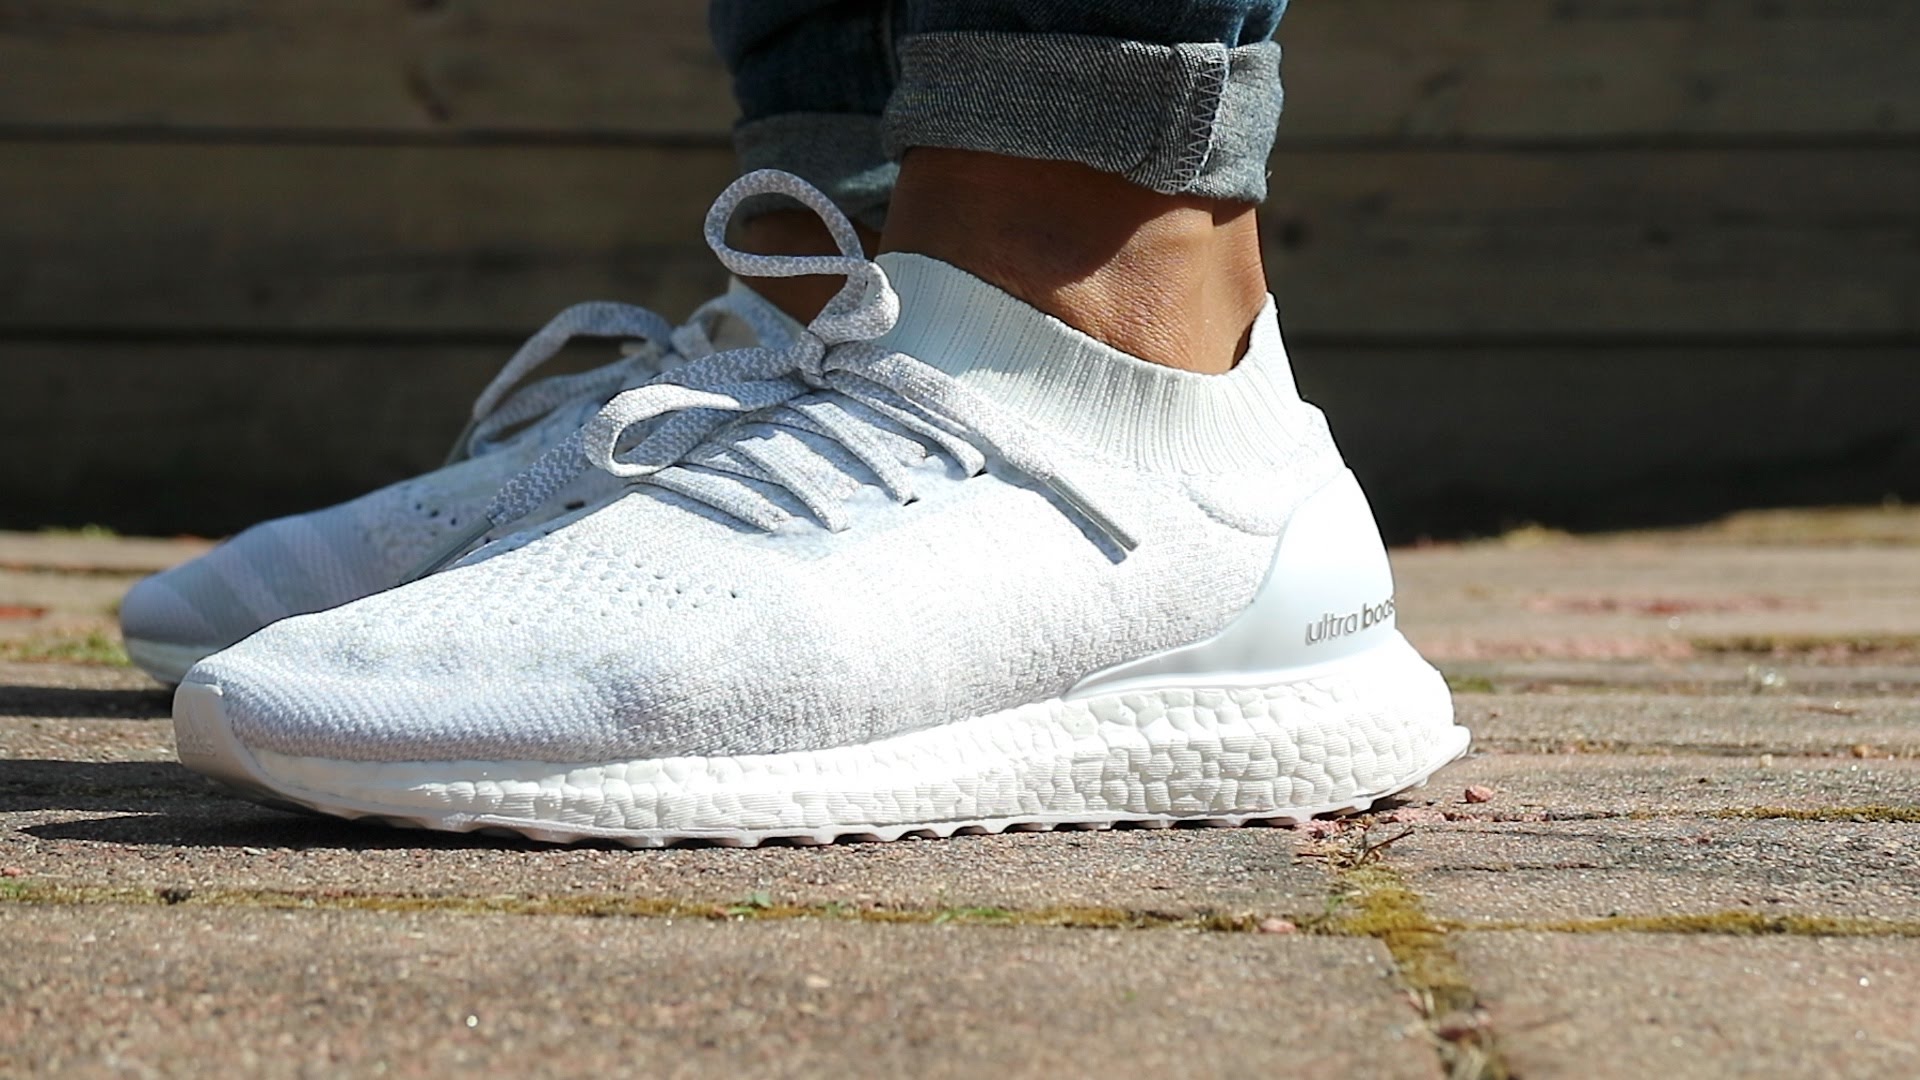 ultra boost triple white uncaged reflective